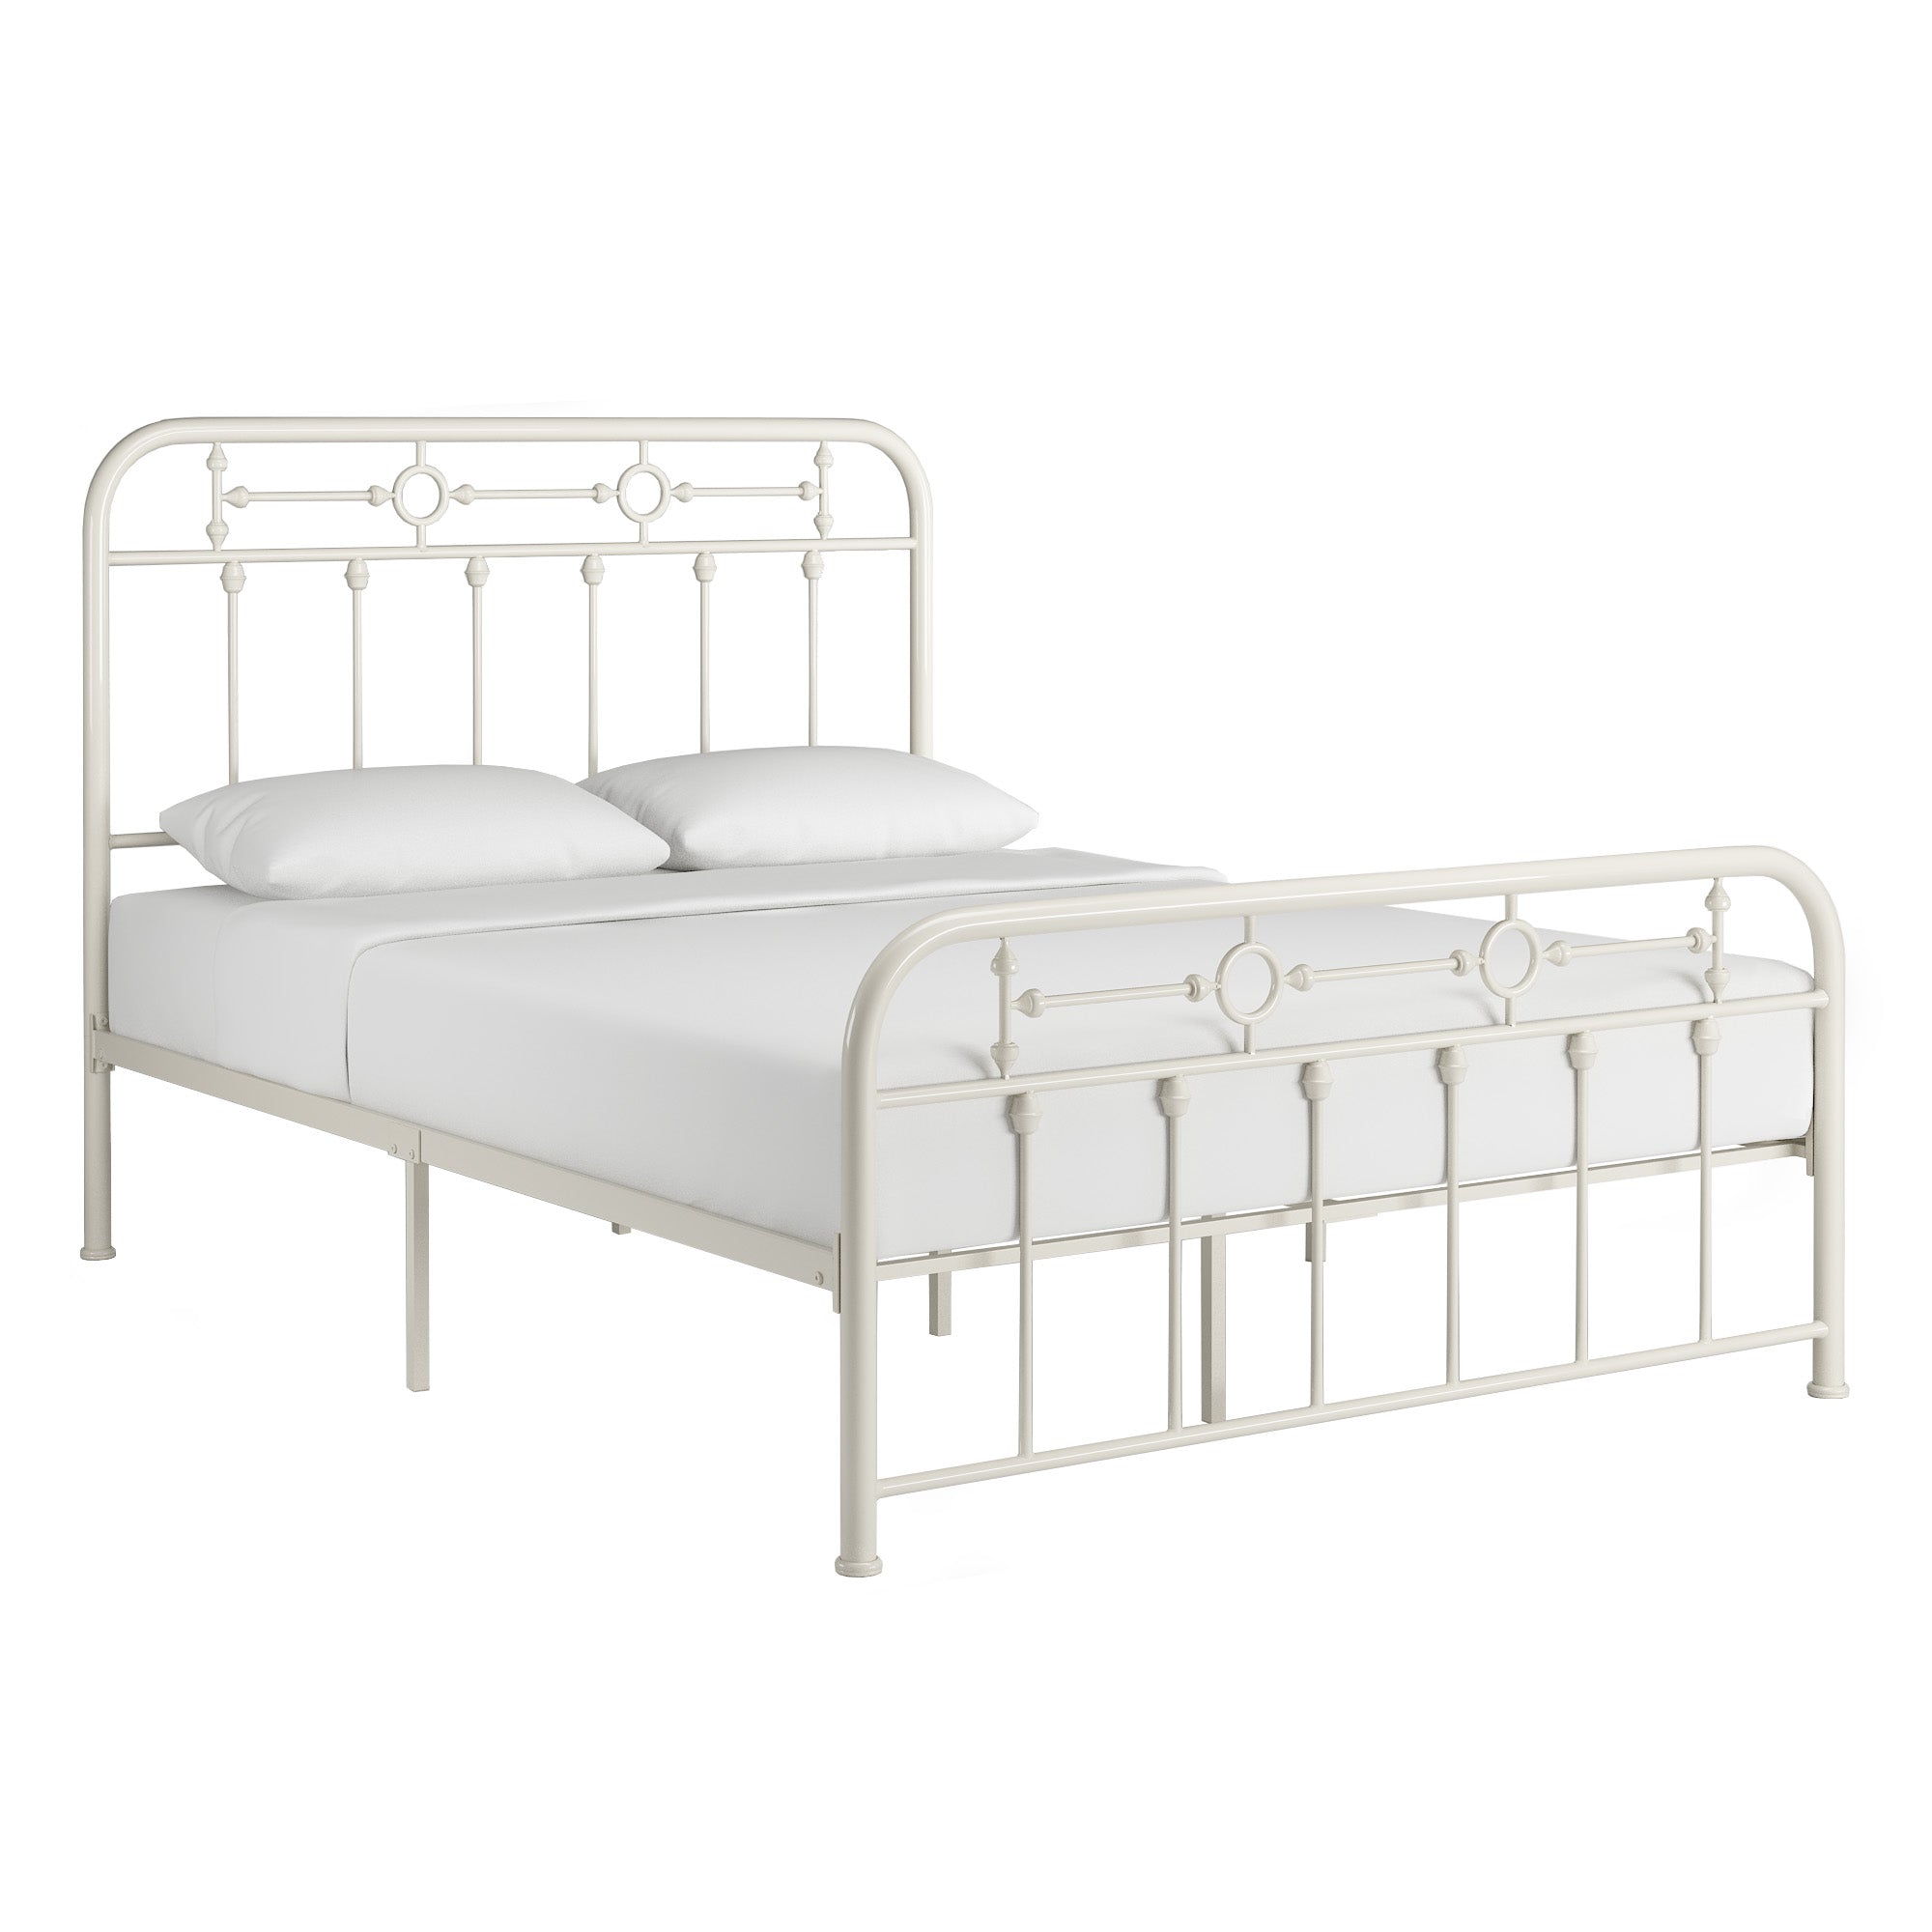 Local Pickup Only - Metal Spindle Platform Bed - White, Full Size (Full Size)